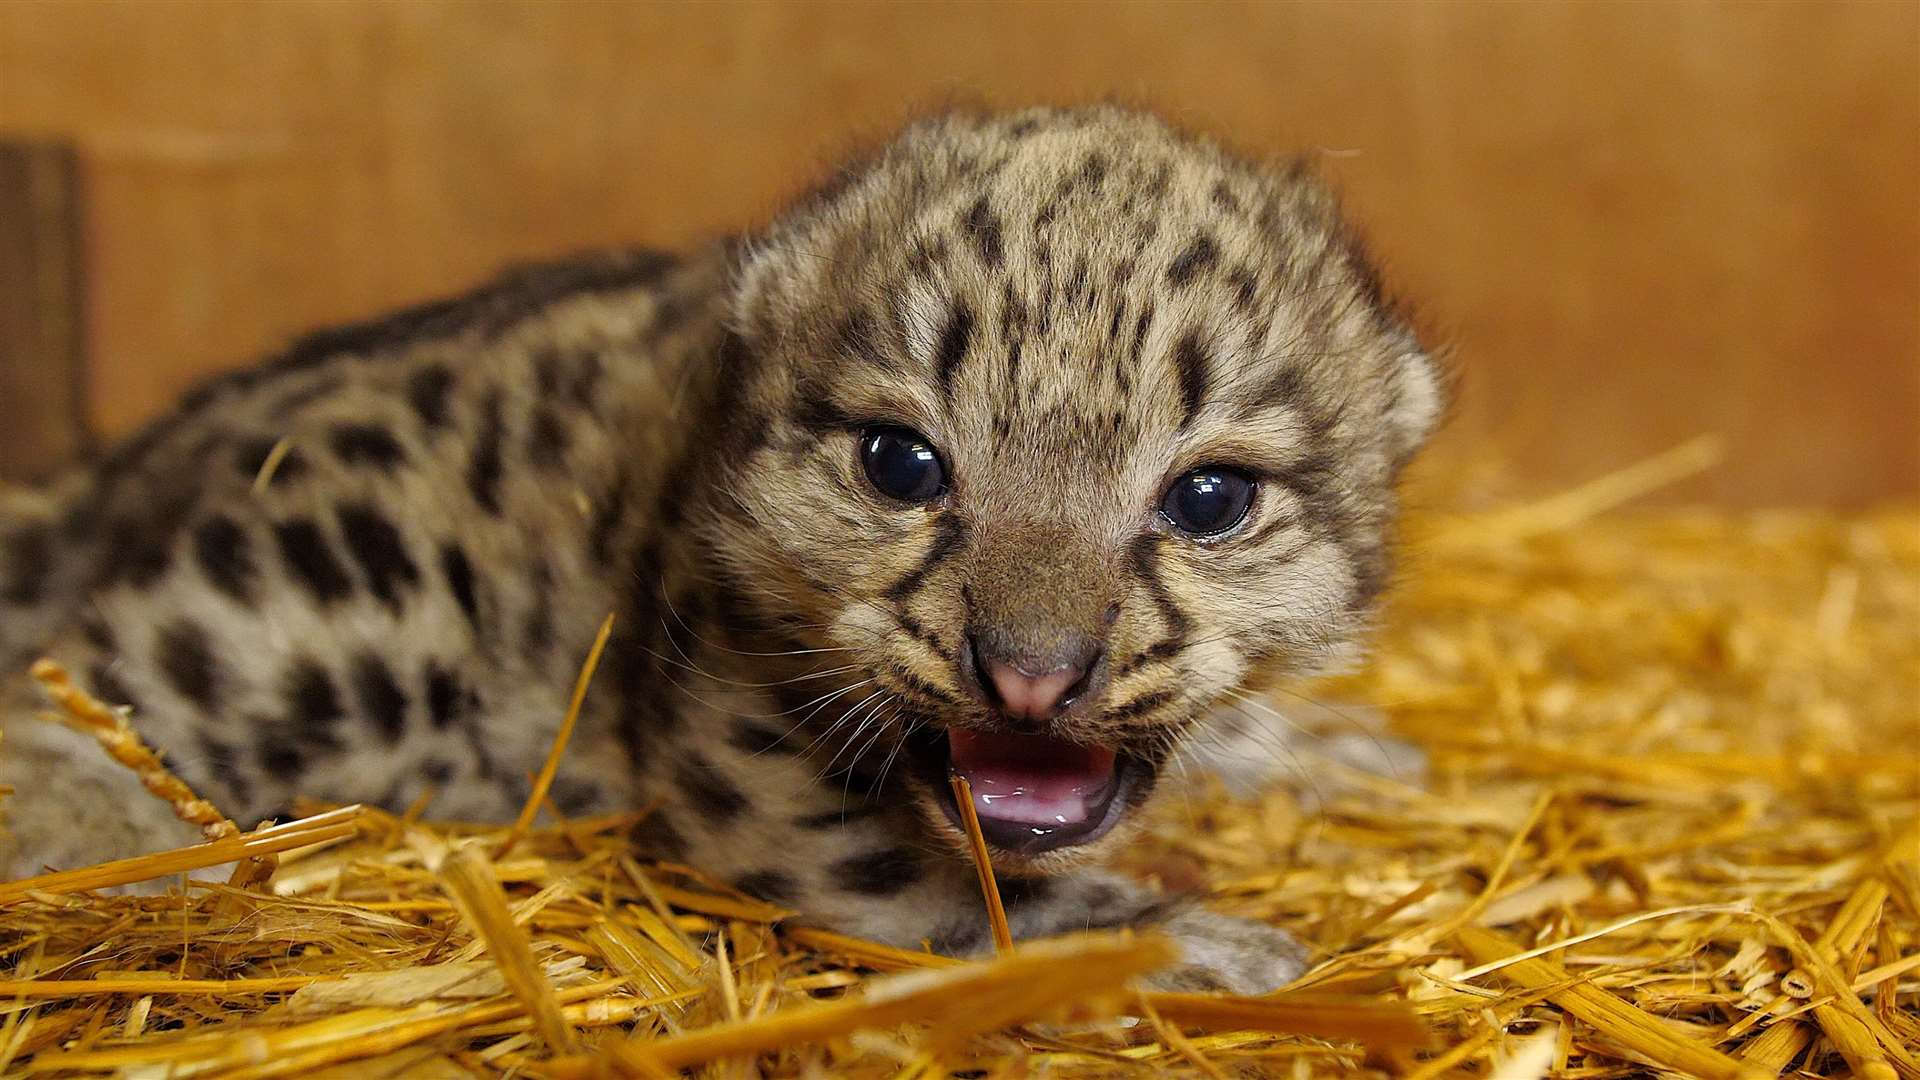 The cub is yet to be named. Photo: Big Cat Sanctuary